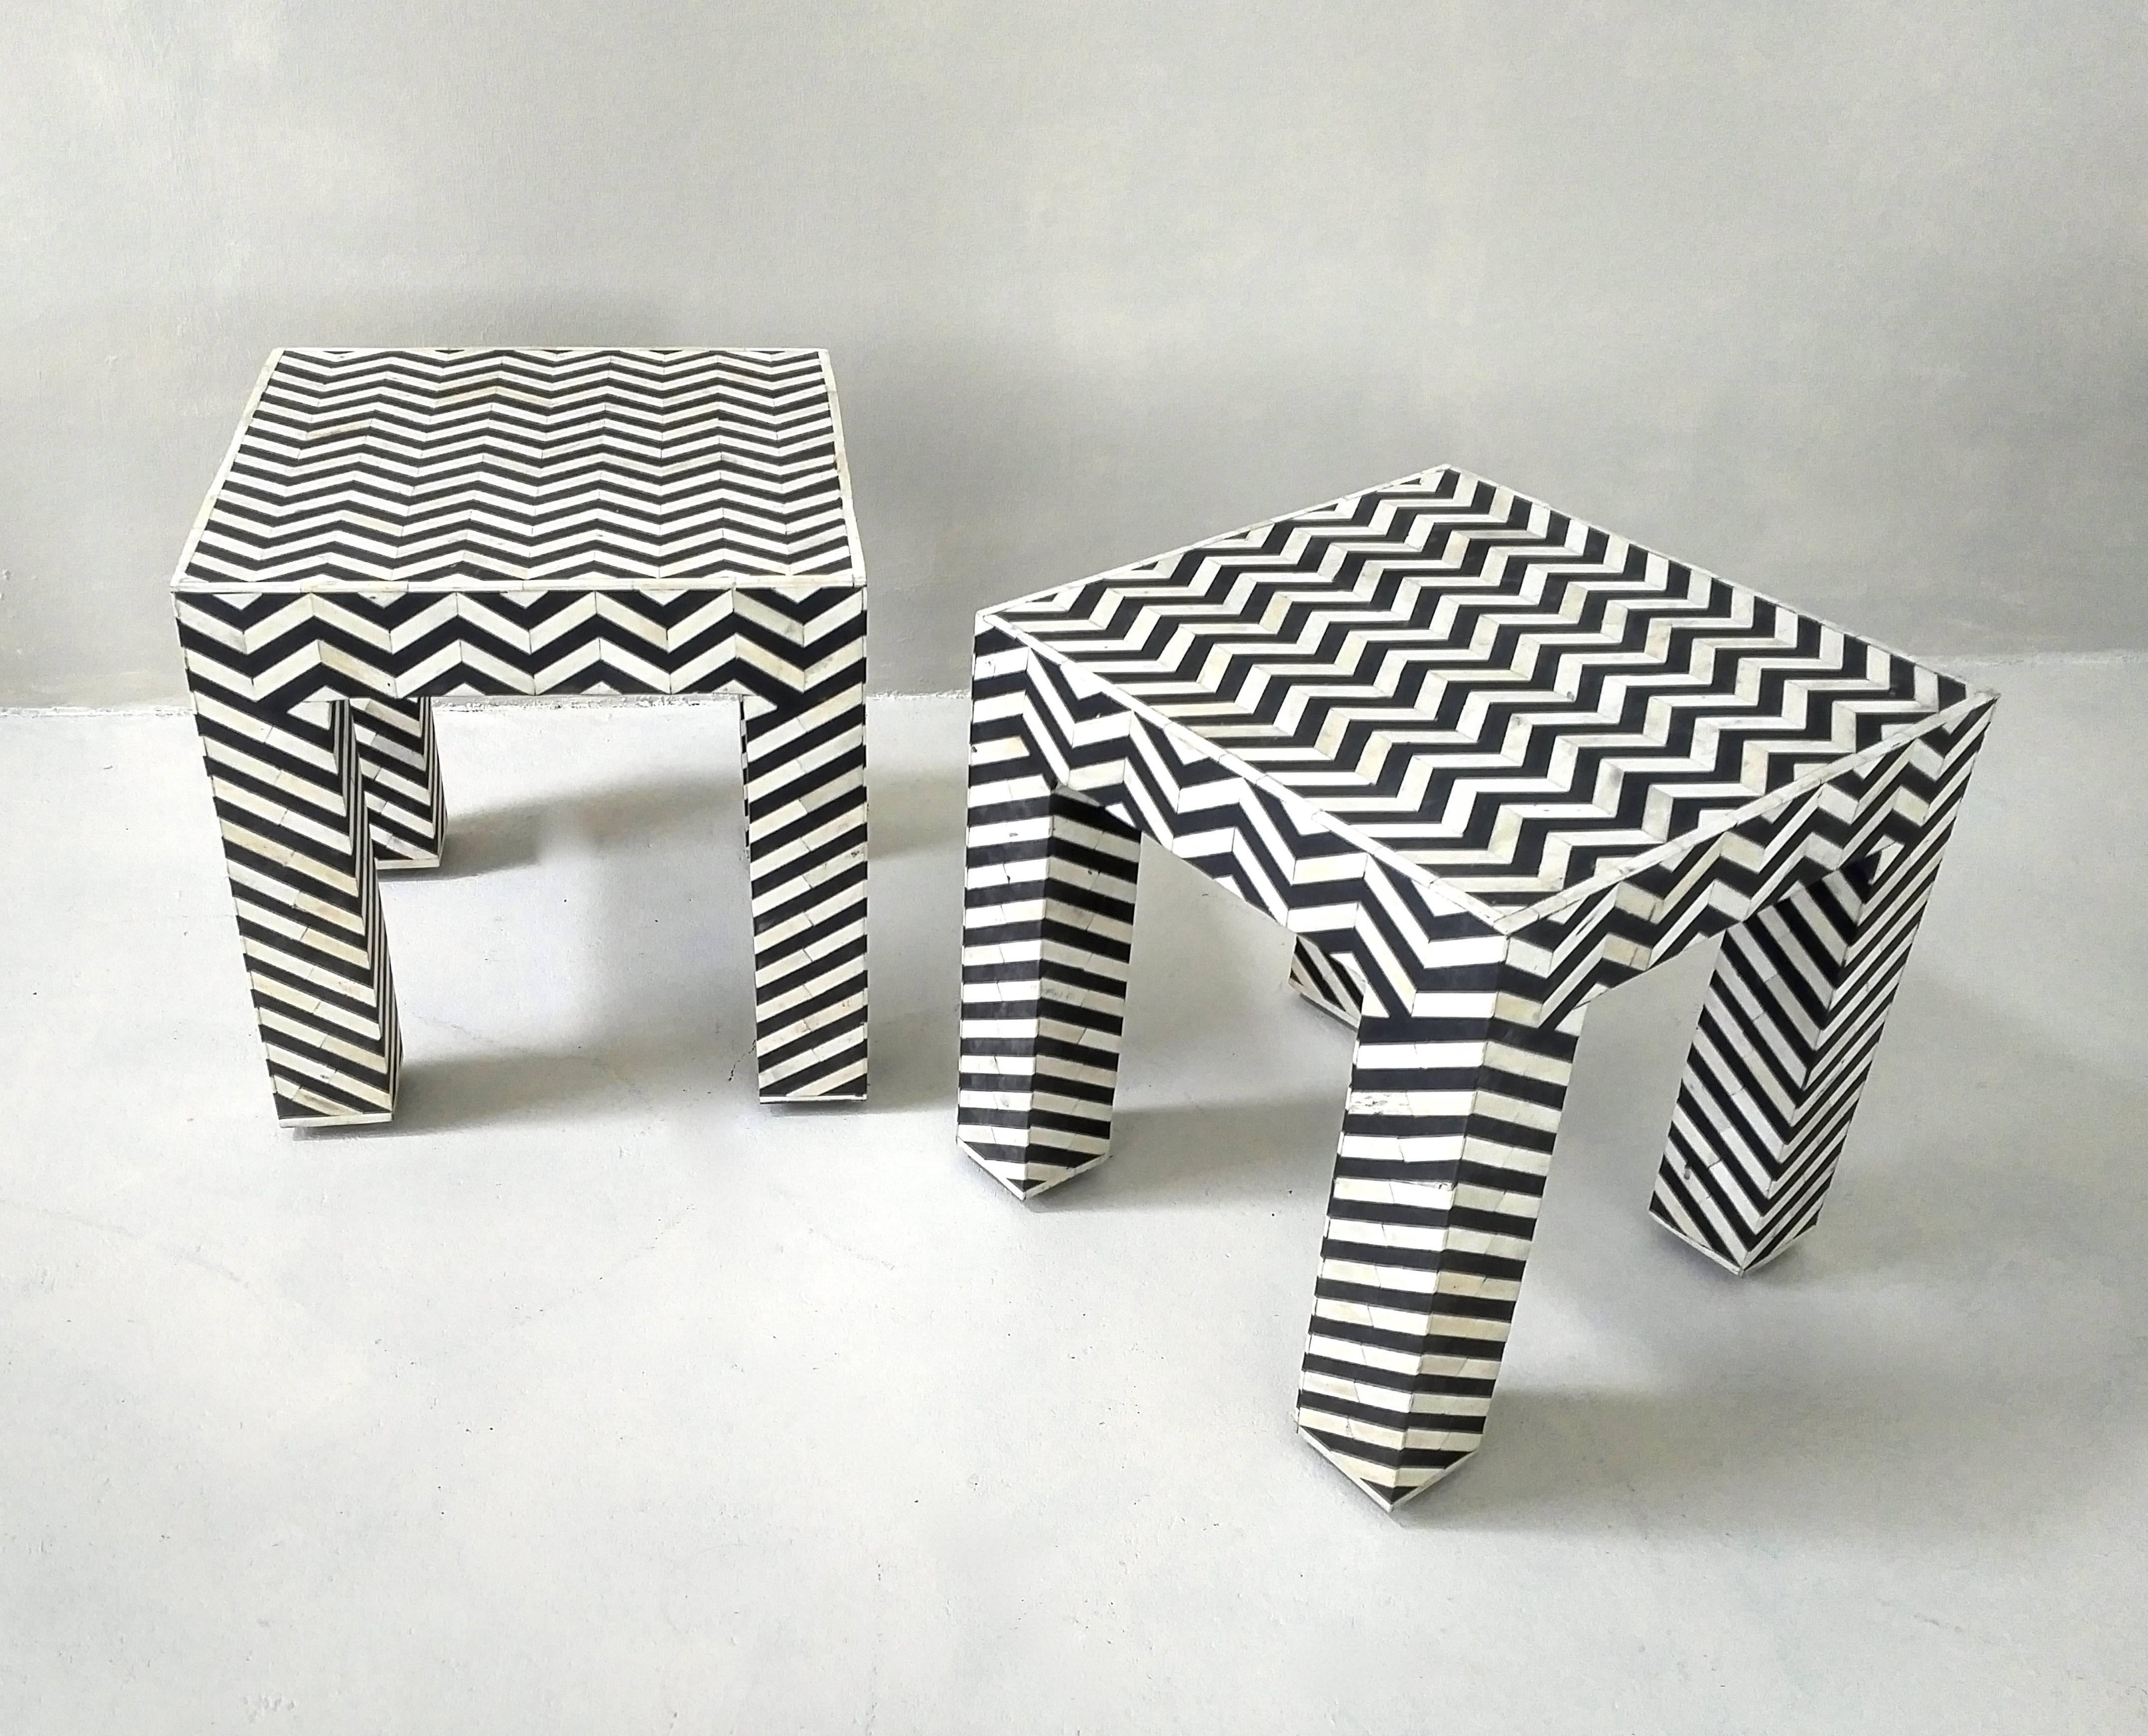 Wonderful pair safari or pop-art style side tables with black and white bone inlay in a geometric pattern on a wooden base.